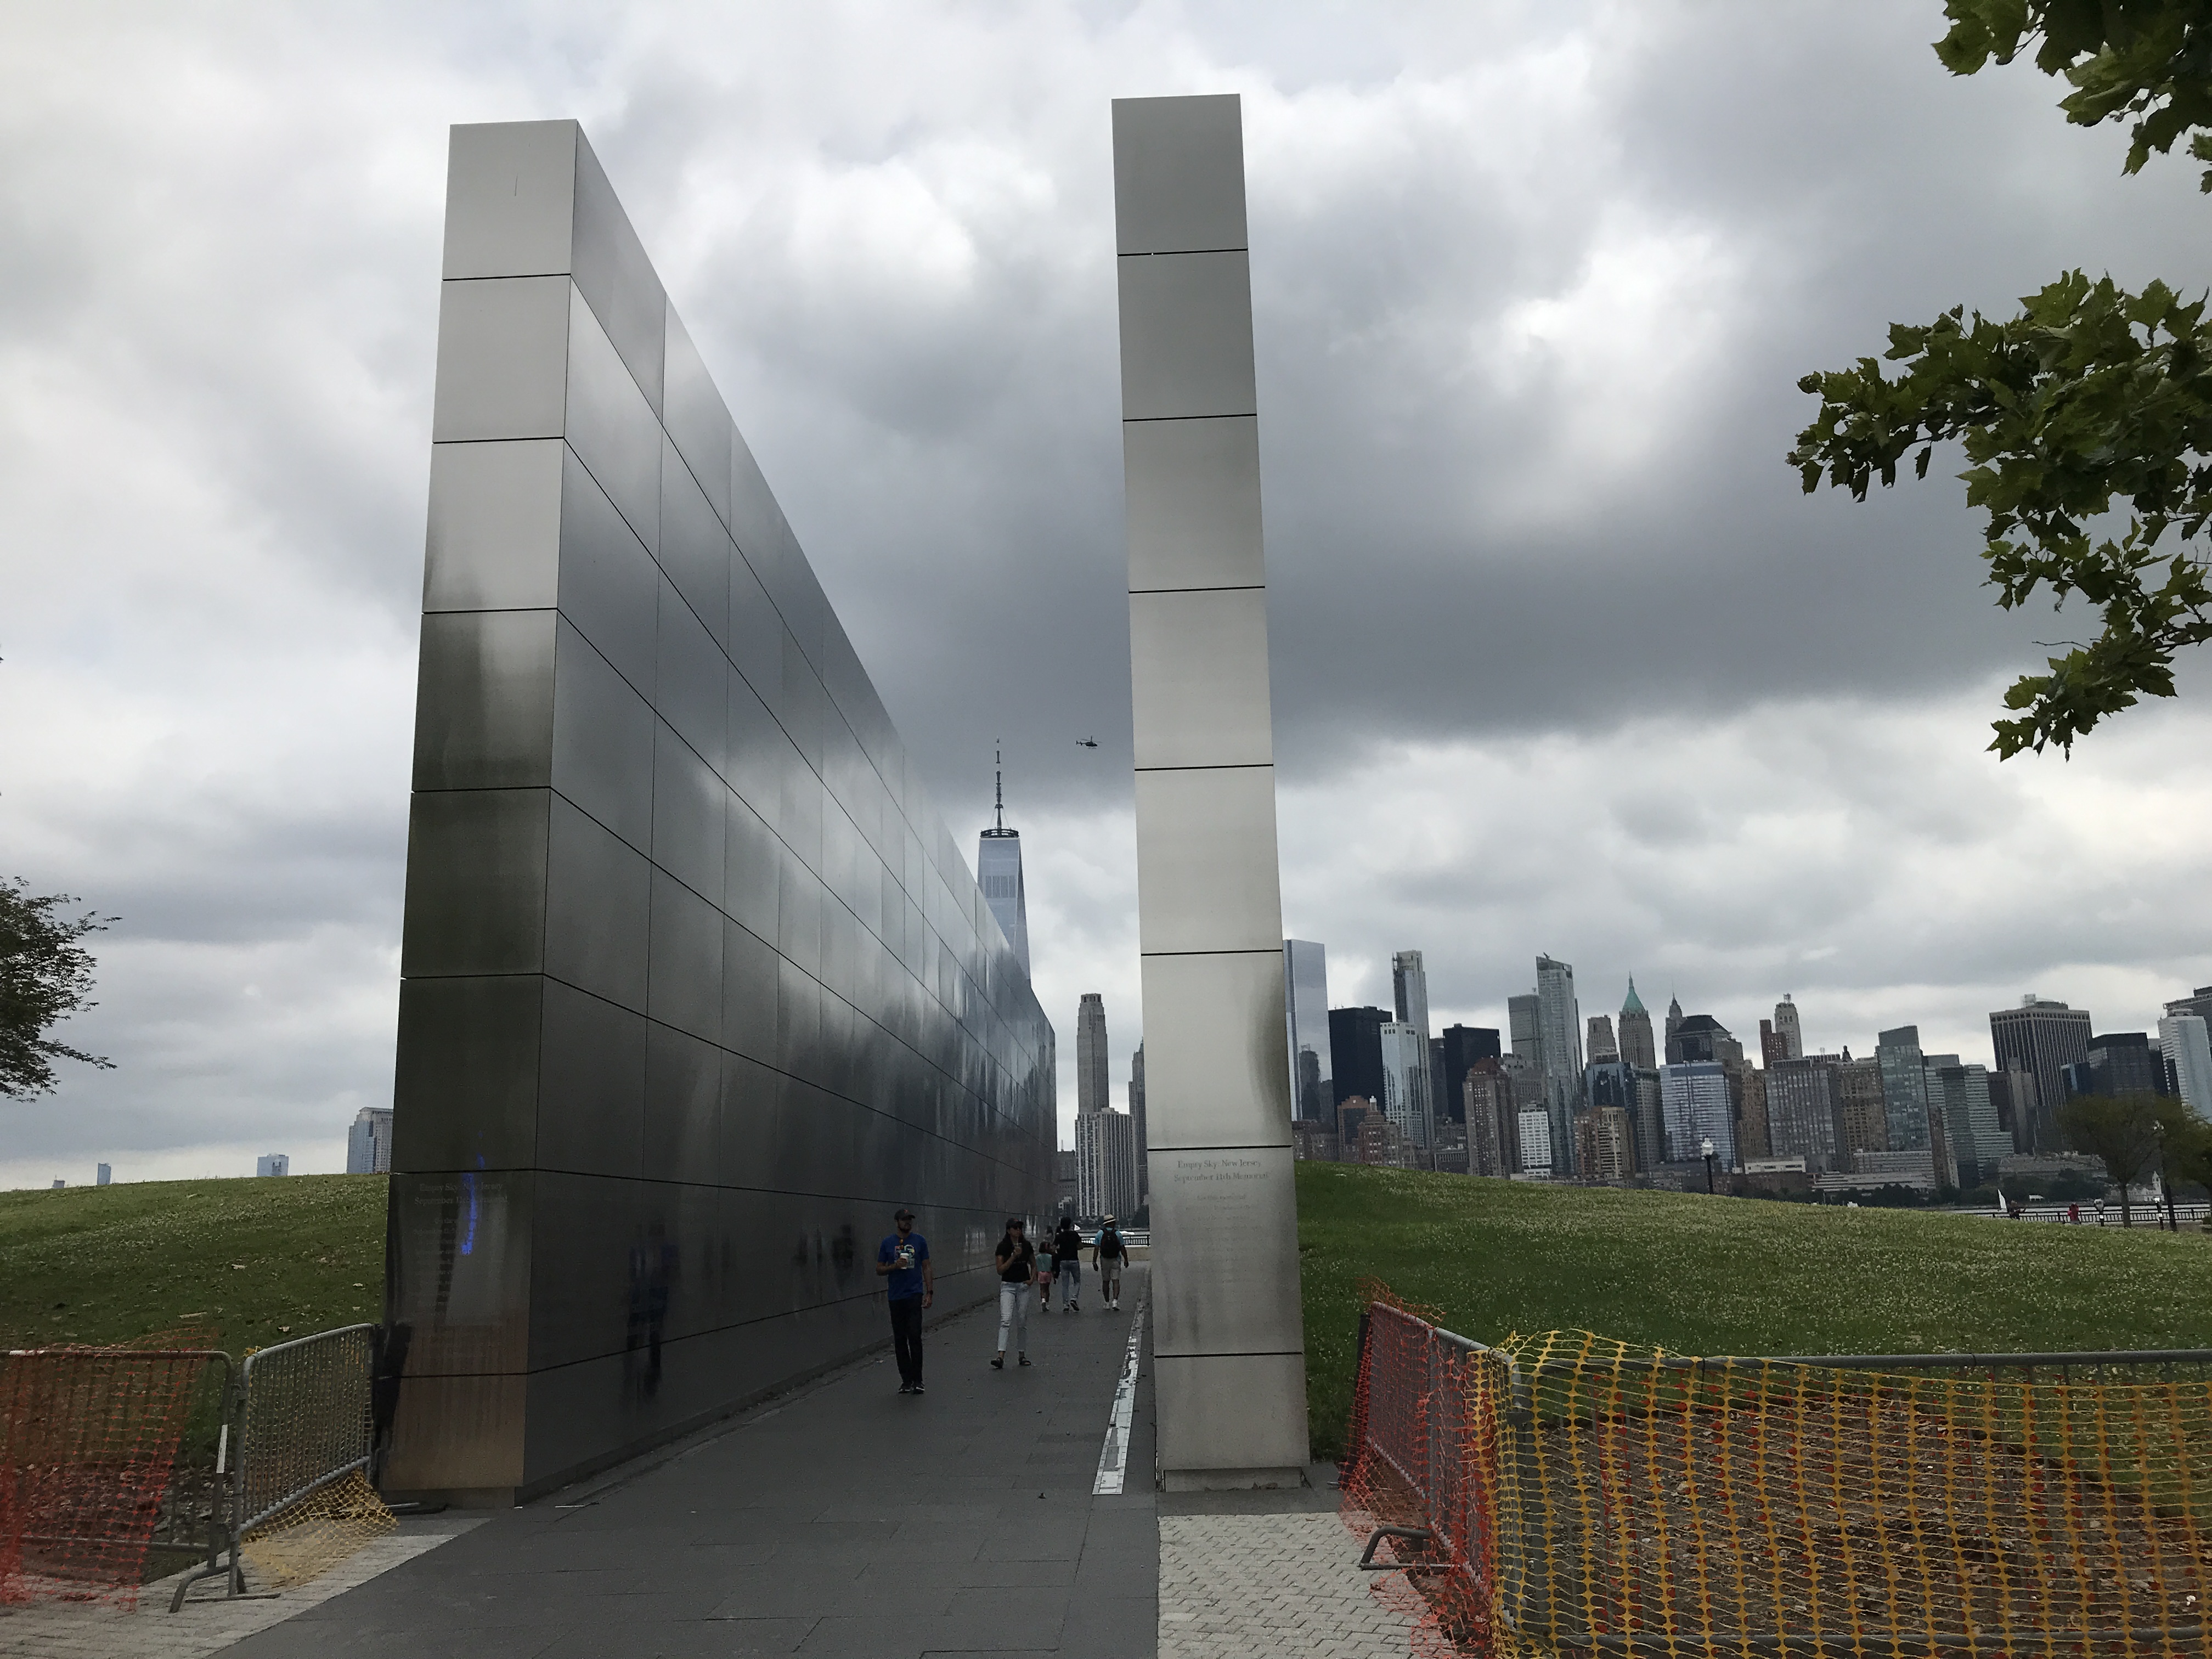 The Empty Sky Memorial has two long rectangular stainless steel walls with the New York City skyscrapers in the background. Sky has dark cloud coverage. Jersey City, New Jersey, United States